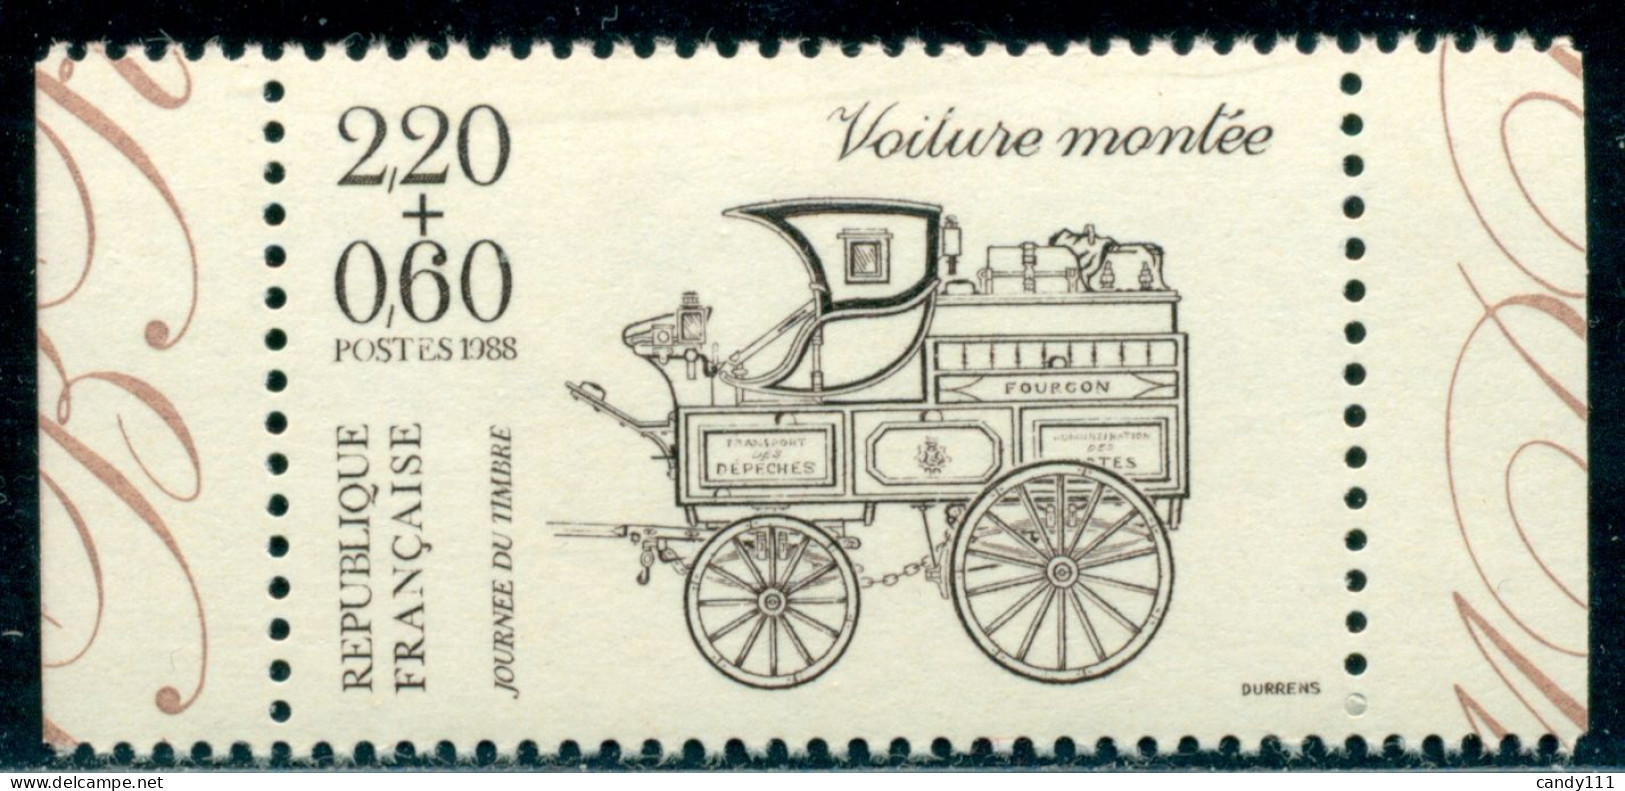 1988 Postal,post Coach,from Booklet,France,2662 Cb,MNH - Stage-Coaches